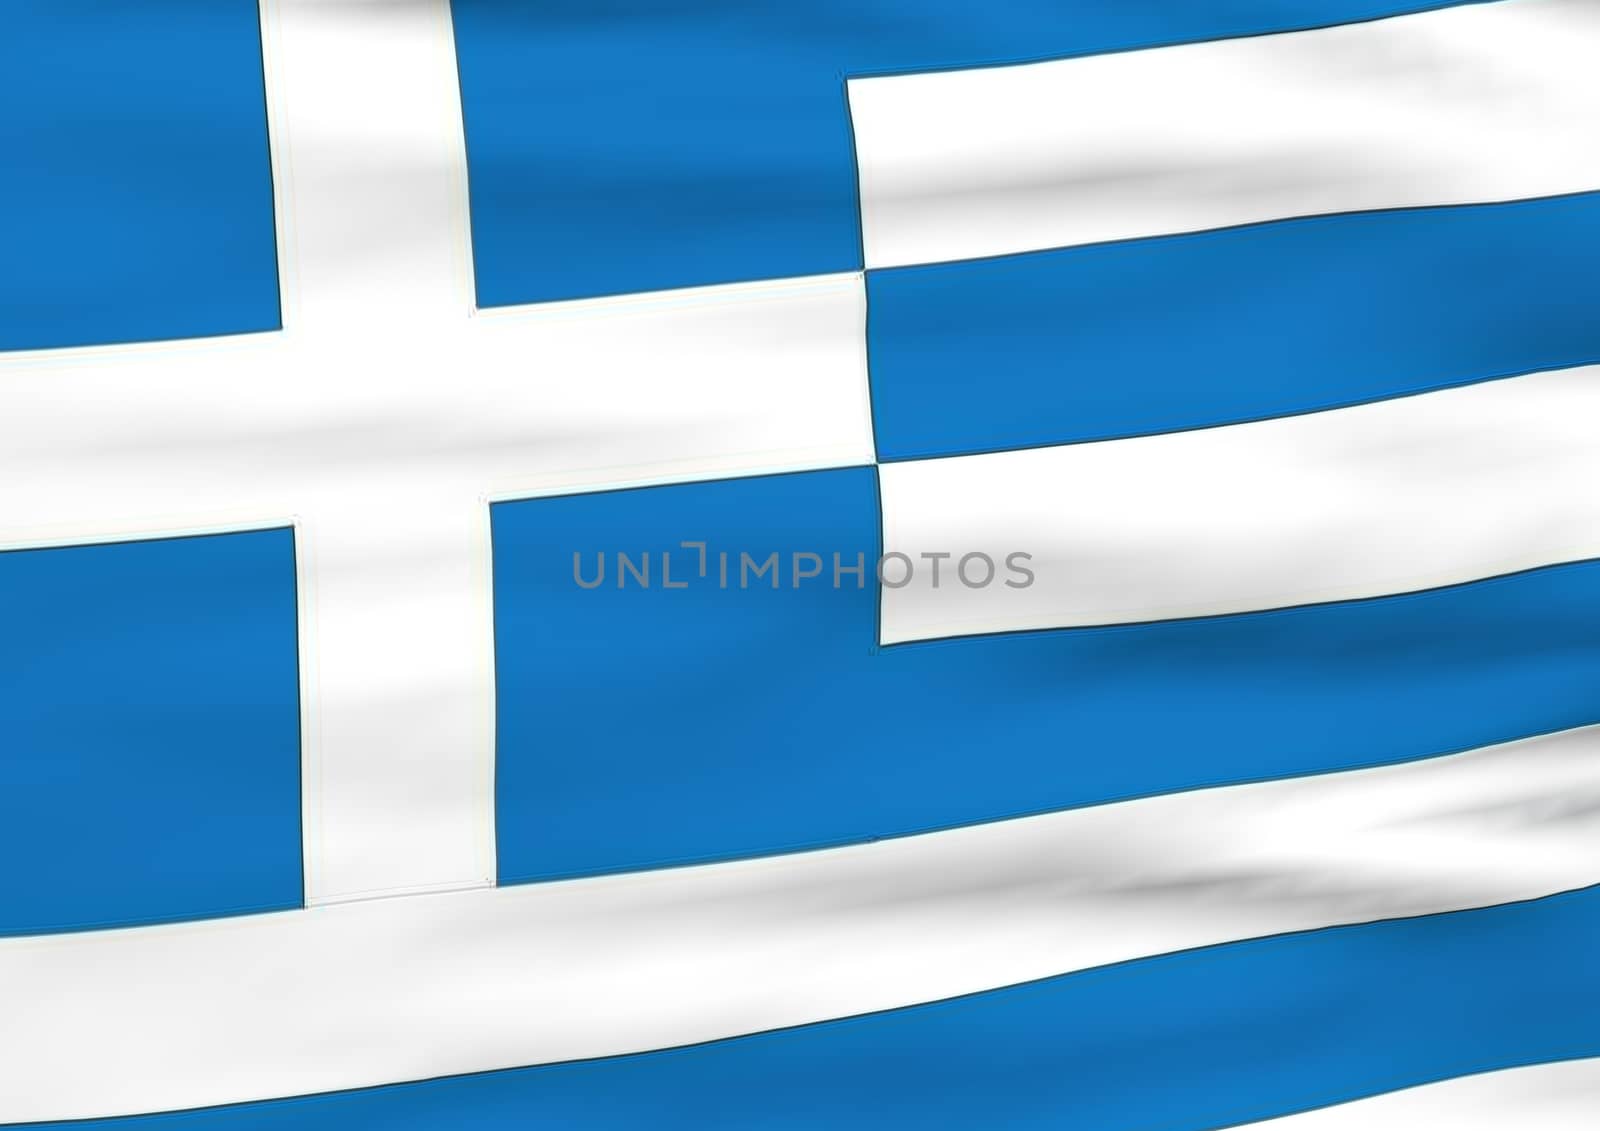 Image of a flag of Greece by richter1910